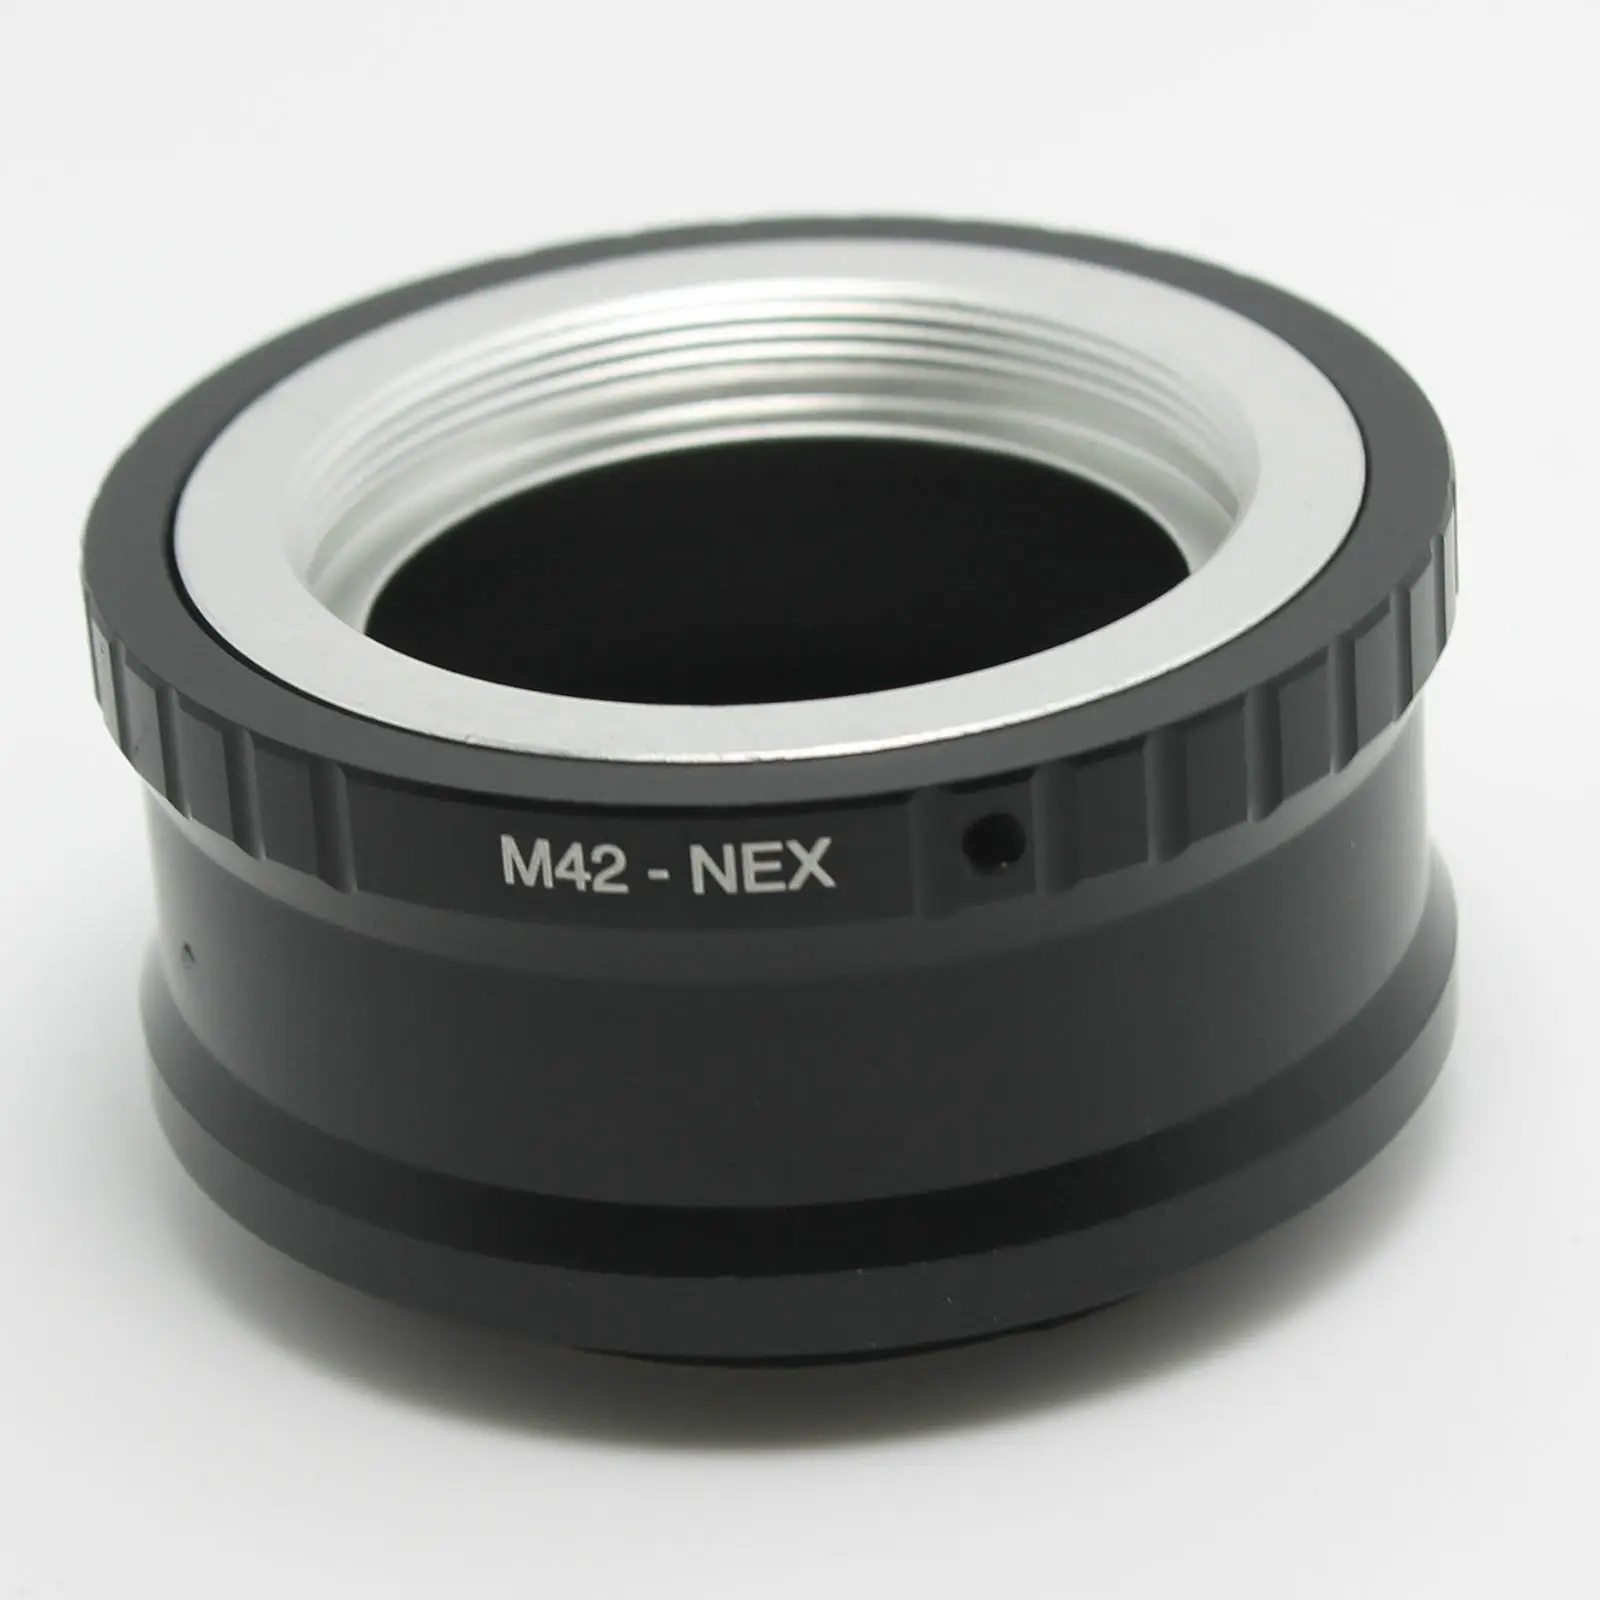 

Adapter ring for 42mm M42 lens to sony E mount NEX NEX-3/5/6/7 A7 A7II A7r A7s a9 a7m2 a7r4 A7r3 A6000 A6300 a6600 camera